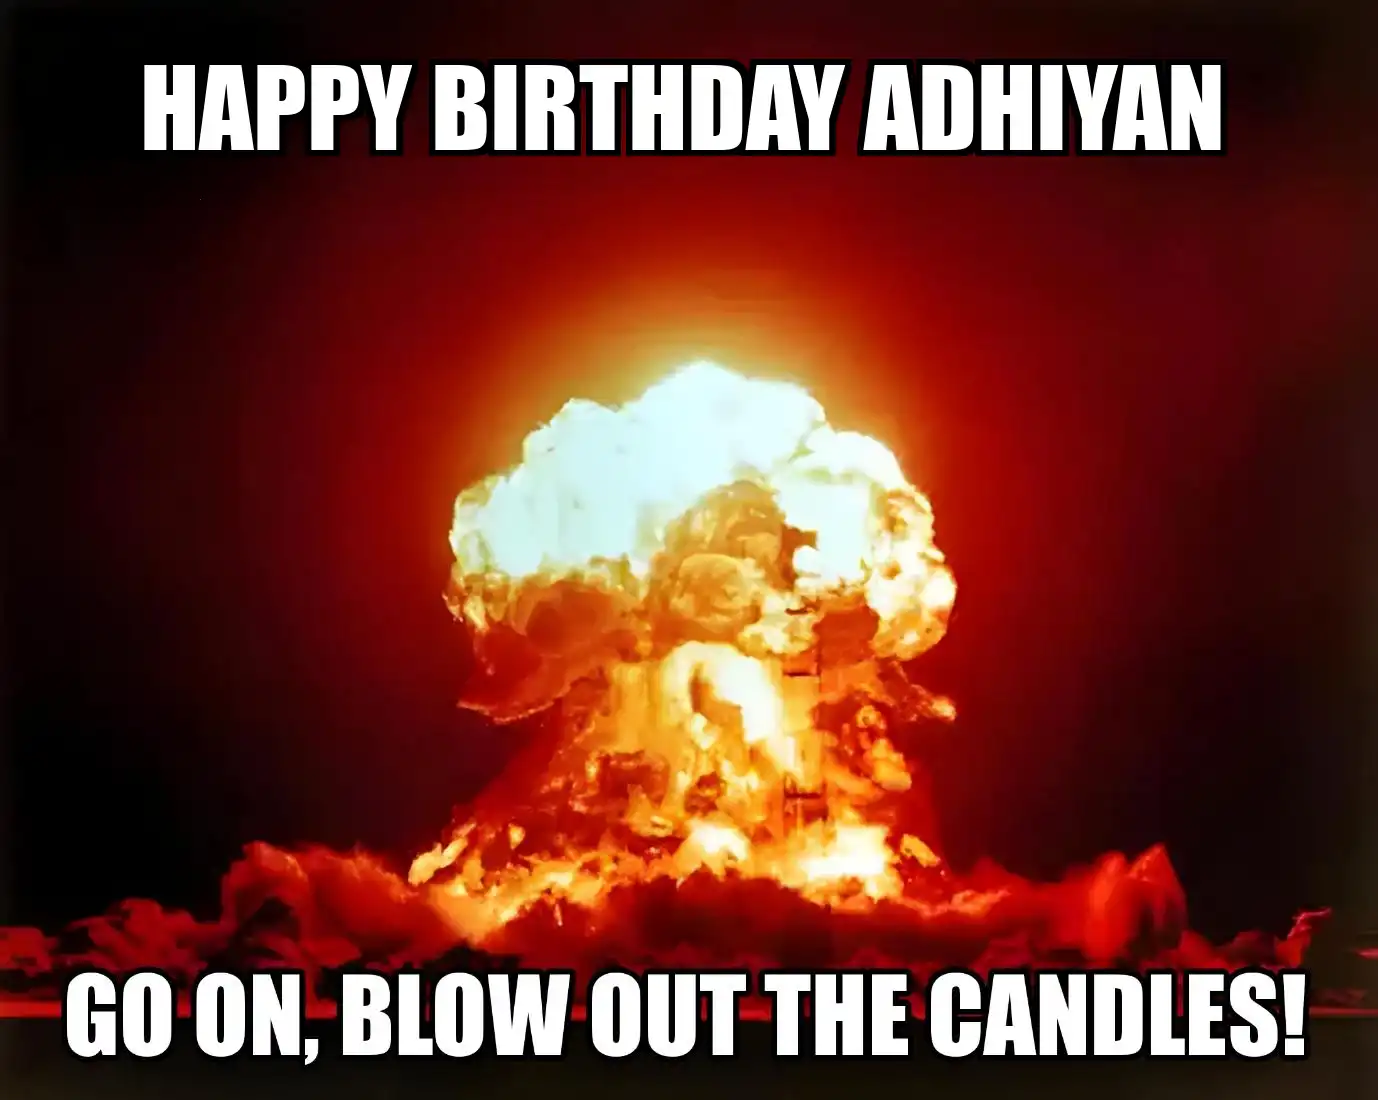 Happy Birthday Adhiyan Go On Blow Out The Candles Meme